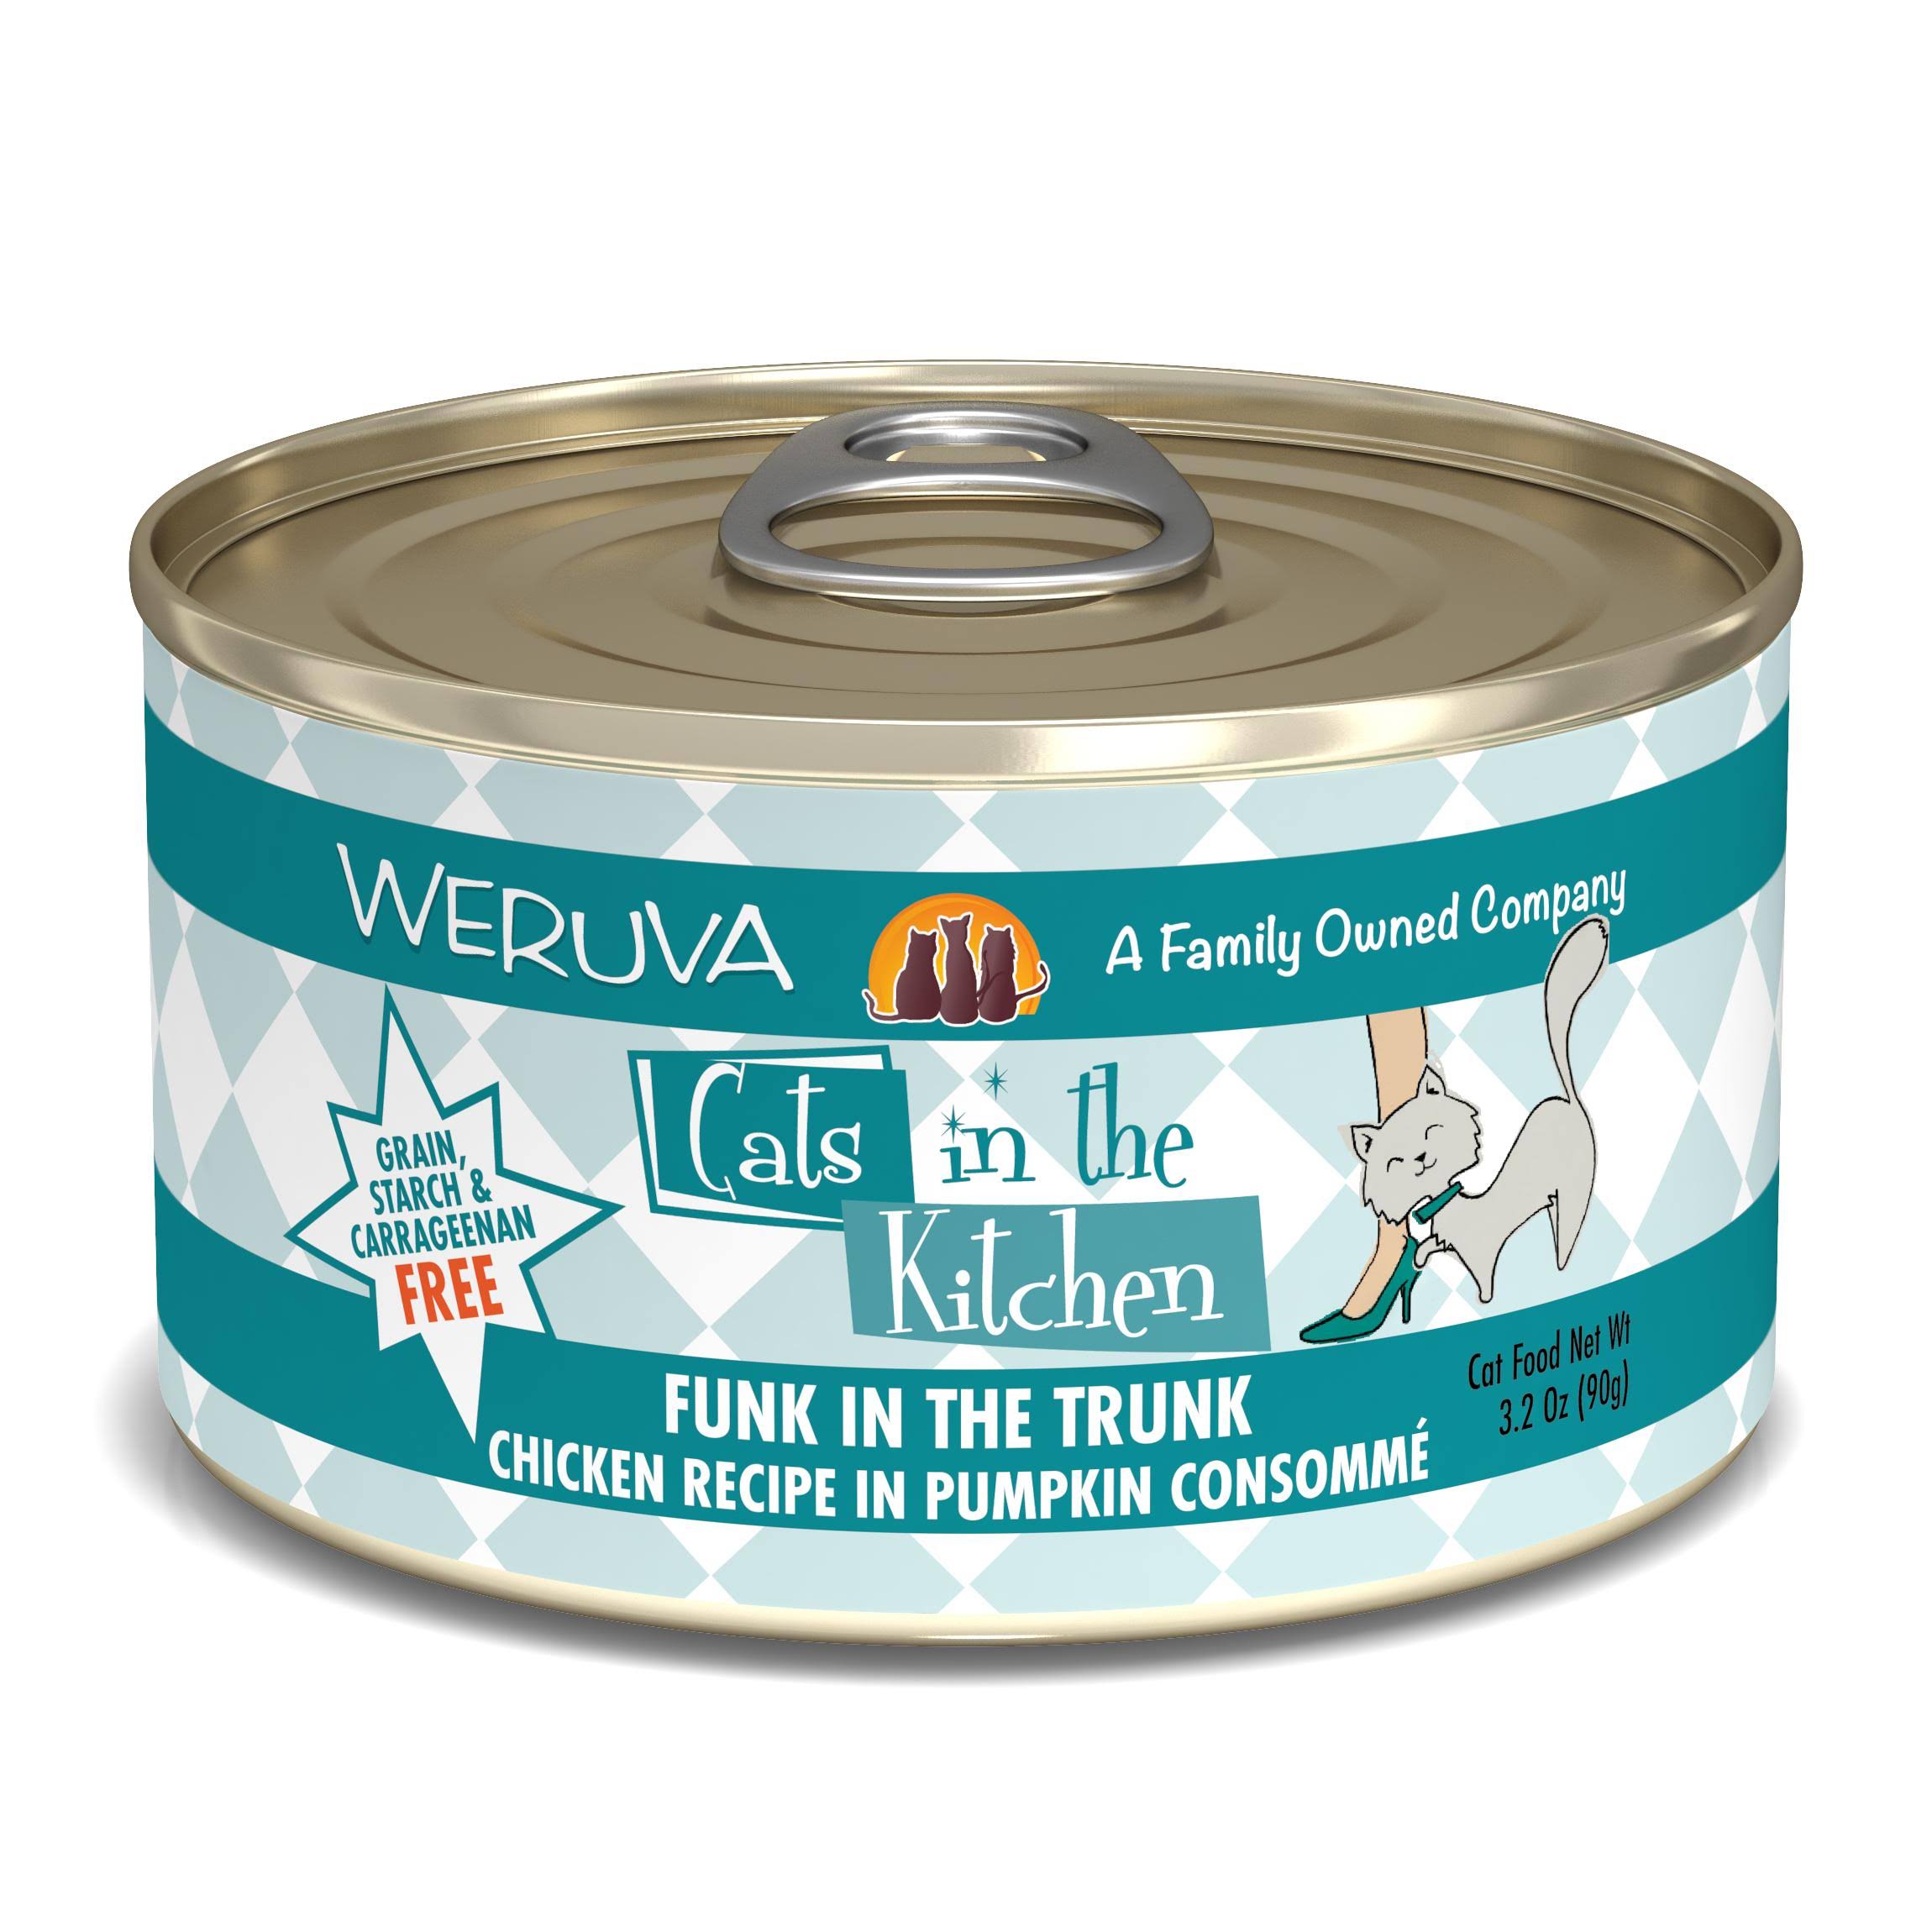 Weruva Cats in The Kitchen Canned Cat Food 3.2oz / Funk in The Trunk